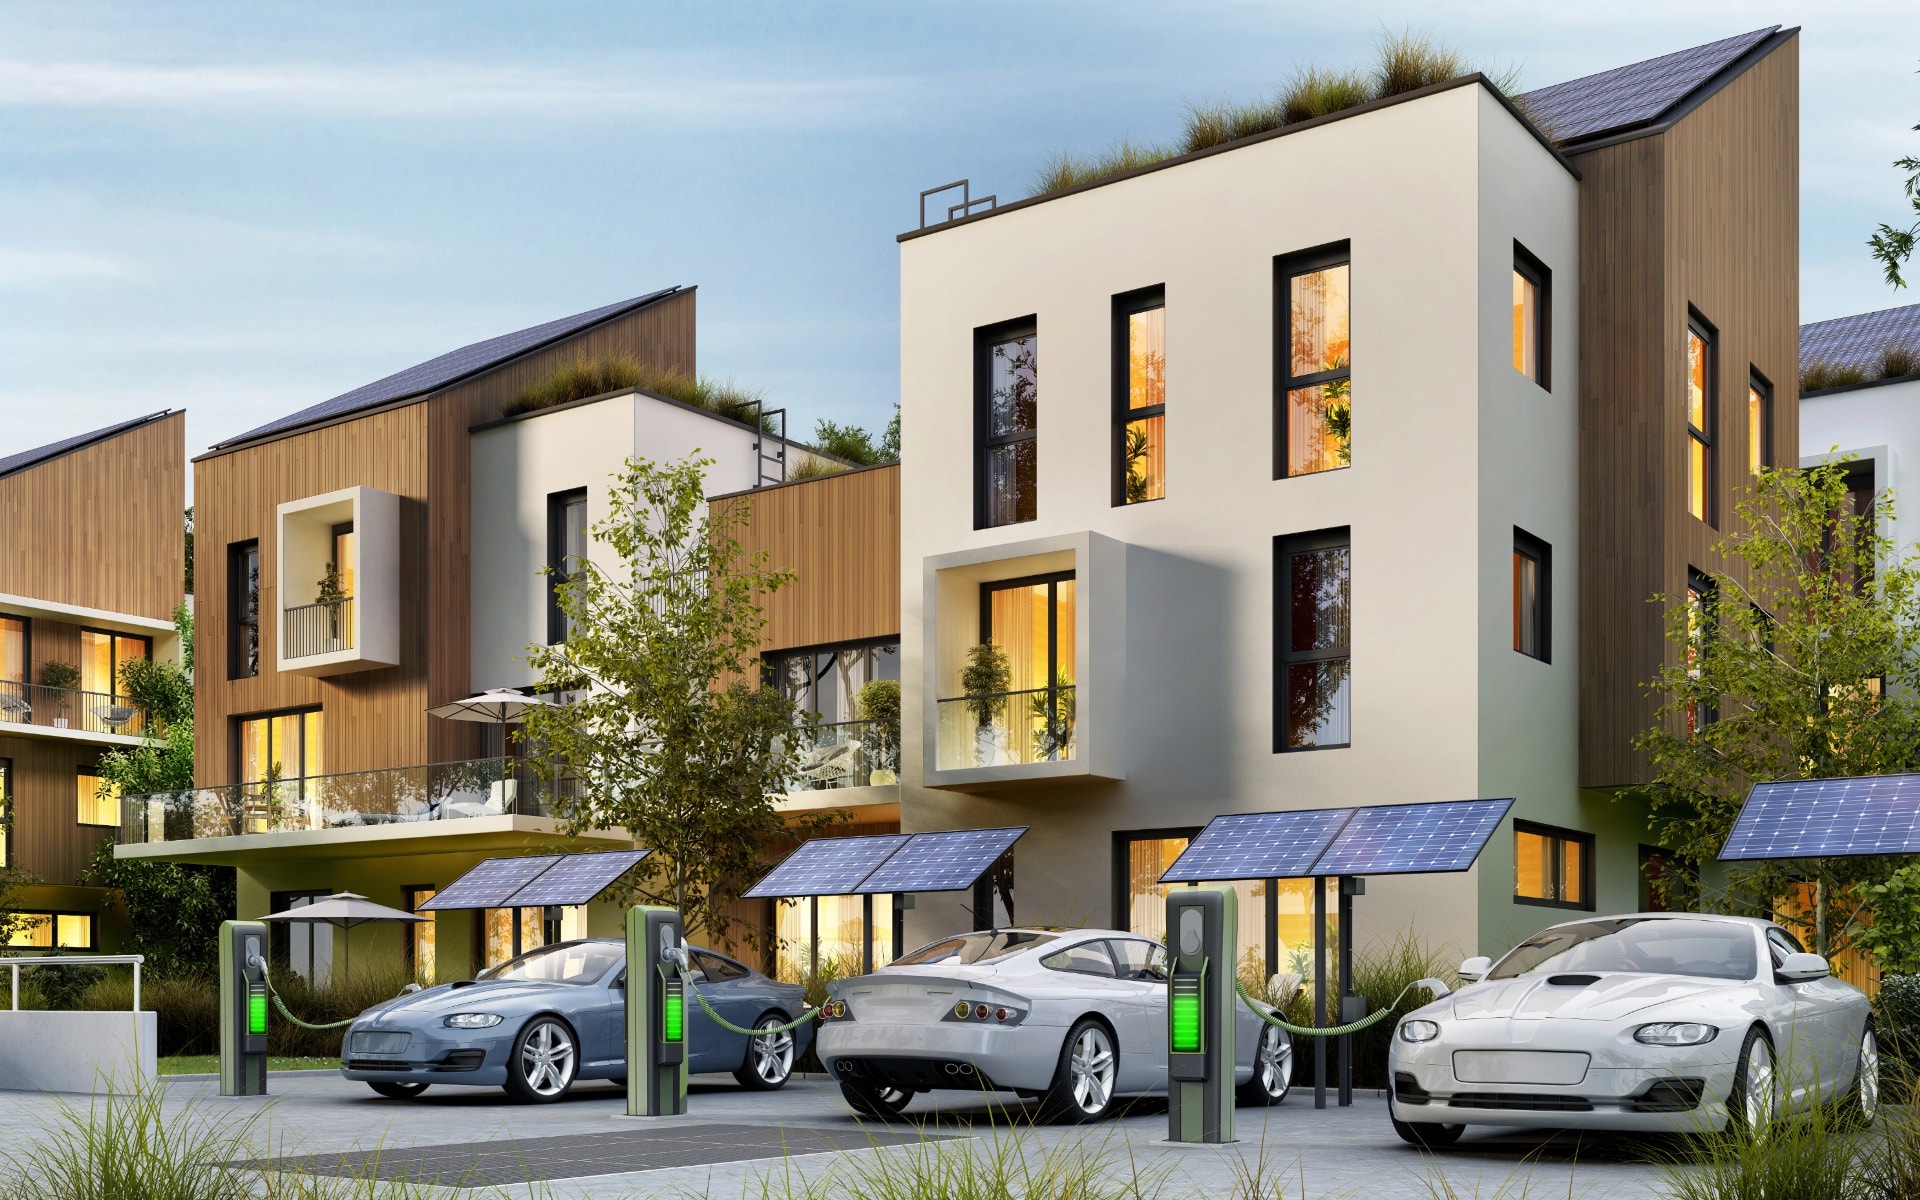 EV Charging: A Vital Amenity in the Multifamily Properties of Today and the Future